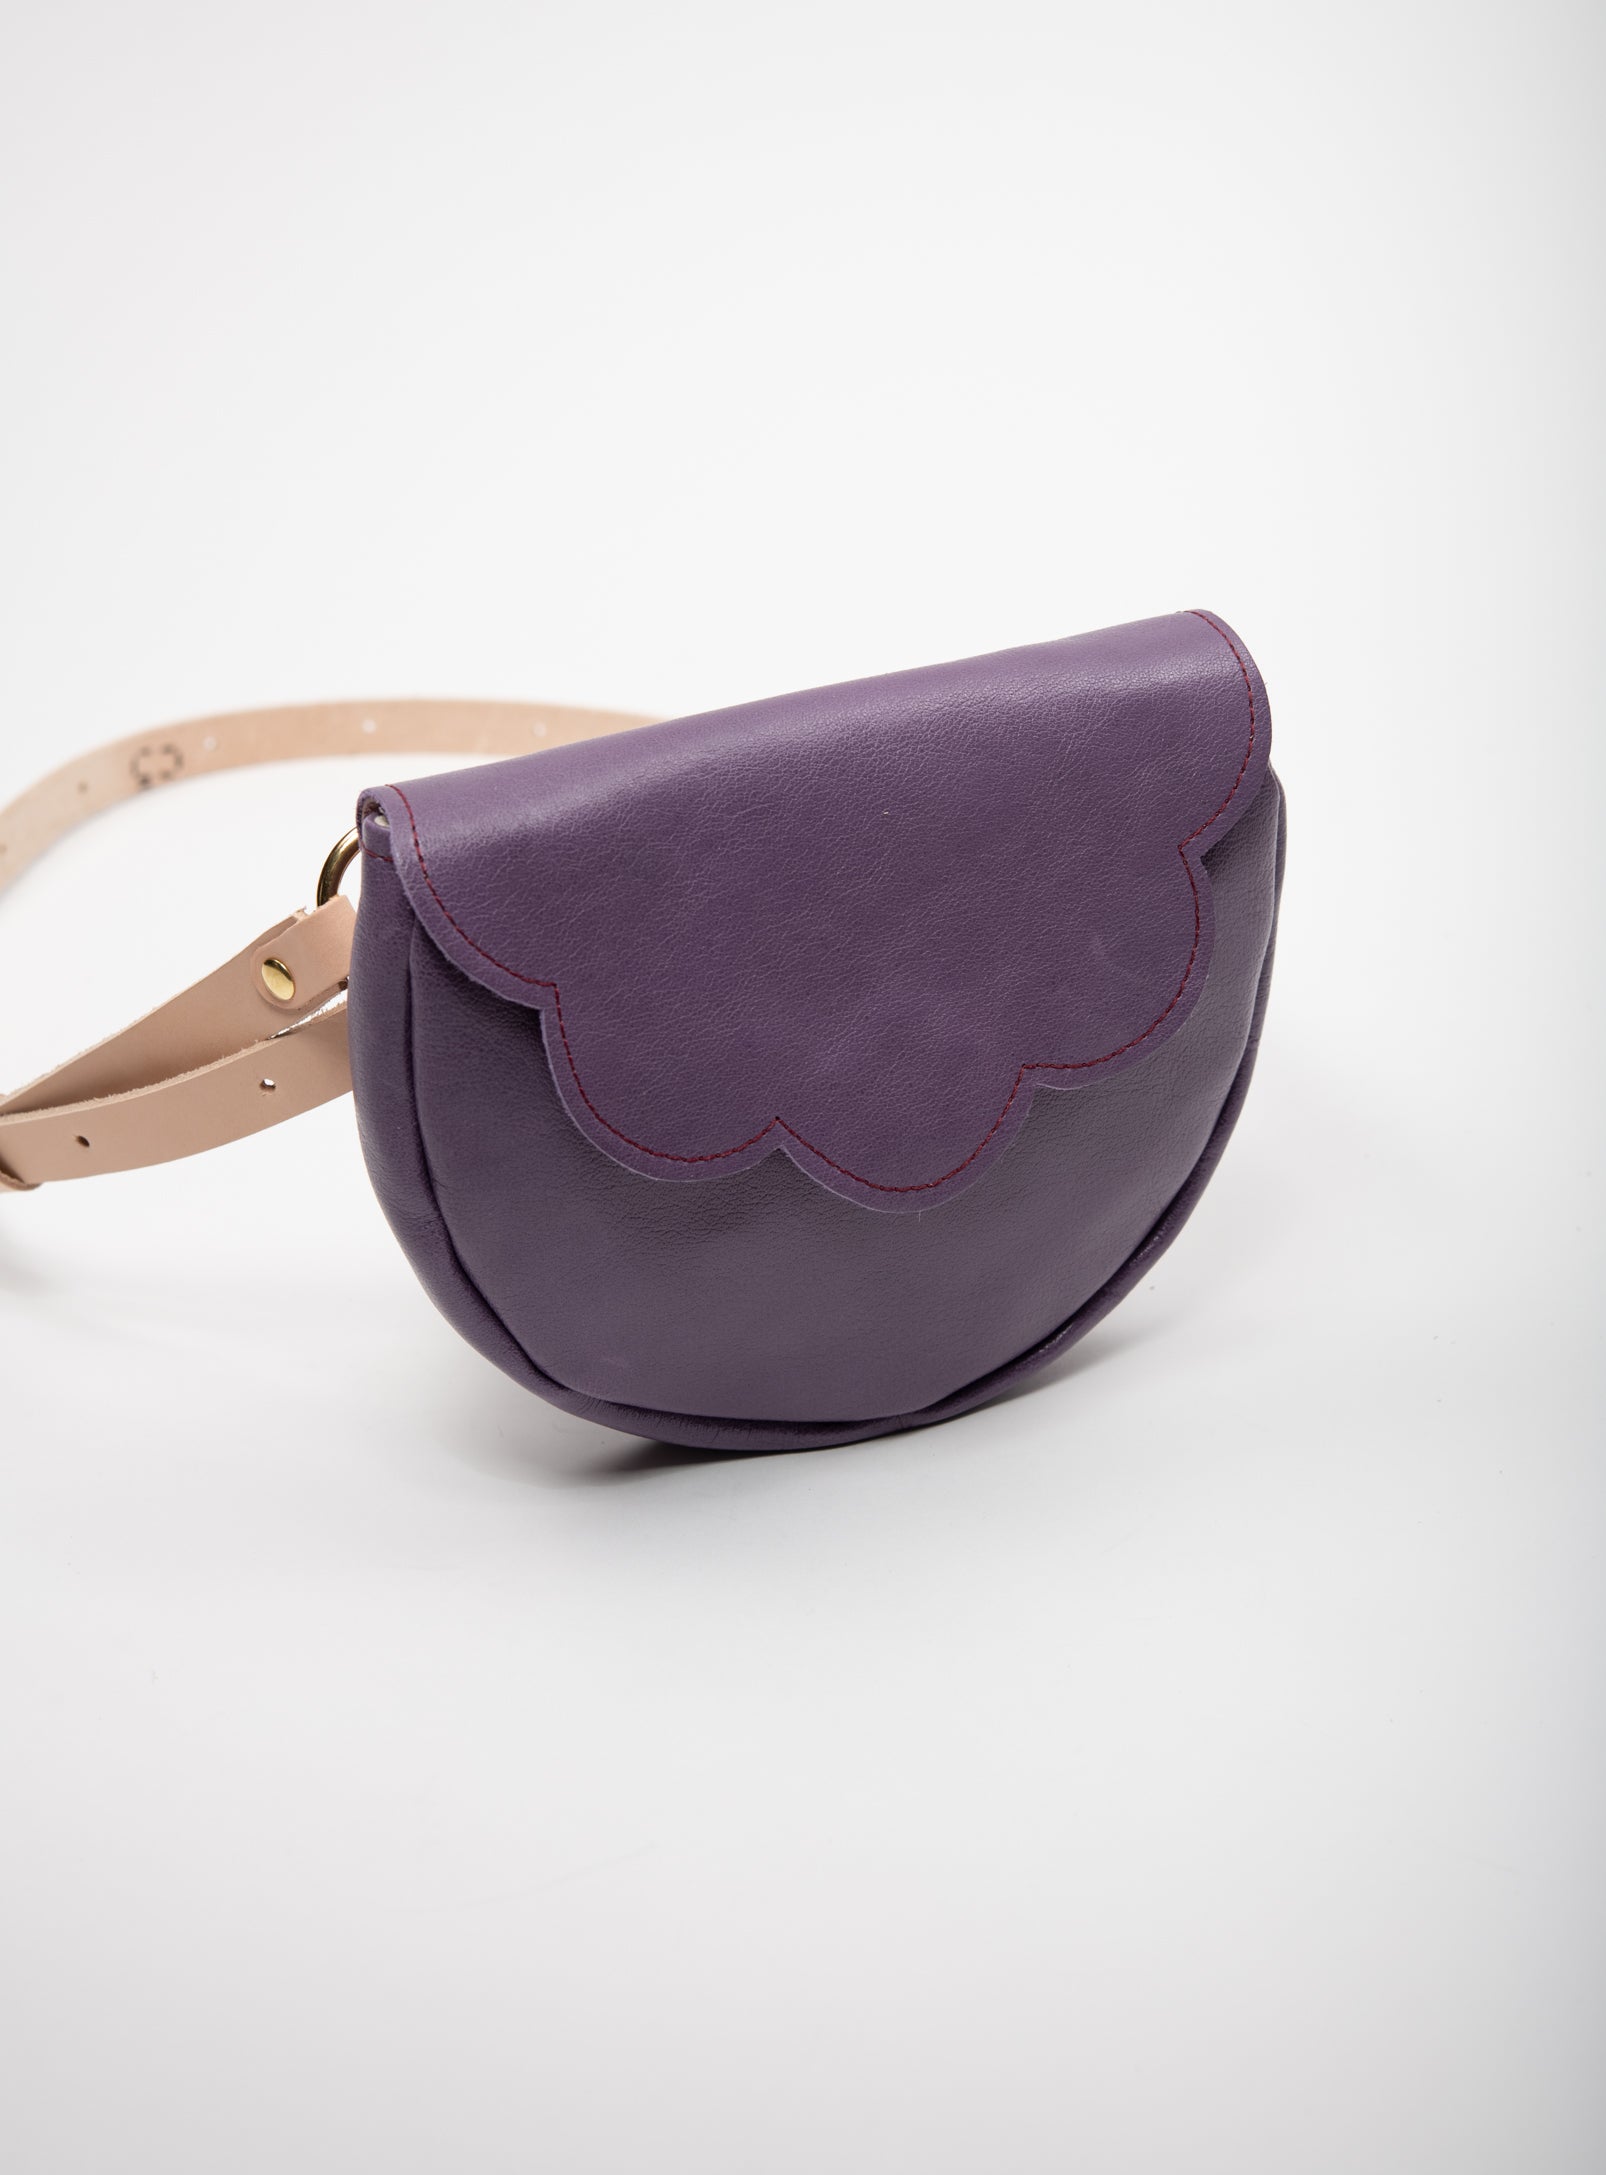 Leather bag with shoulder strap and scalloped flap PRIMULA model, all Veinage are handmade in Montreal, Canada